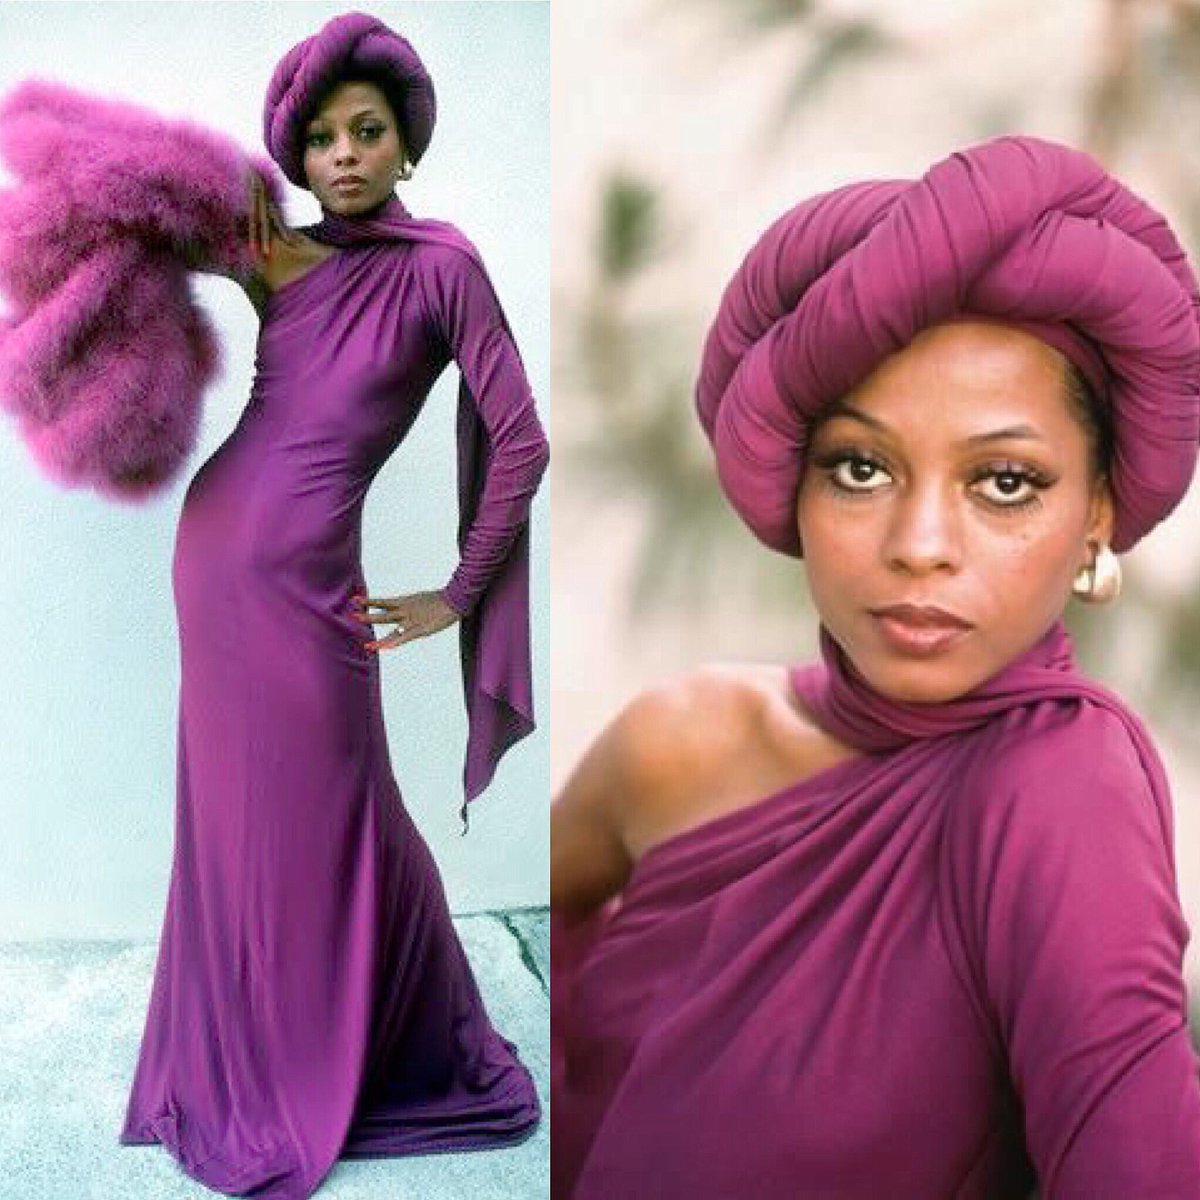 Mahogany, a 1975 film where Diana Ross costumed herself gorgeously: